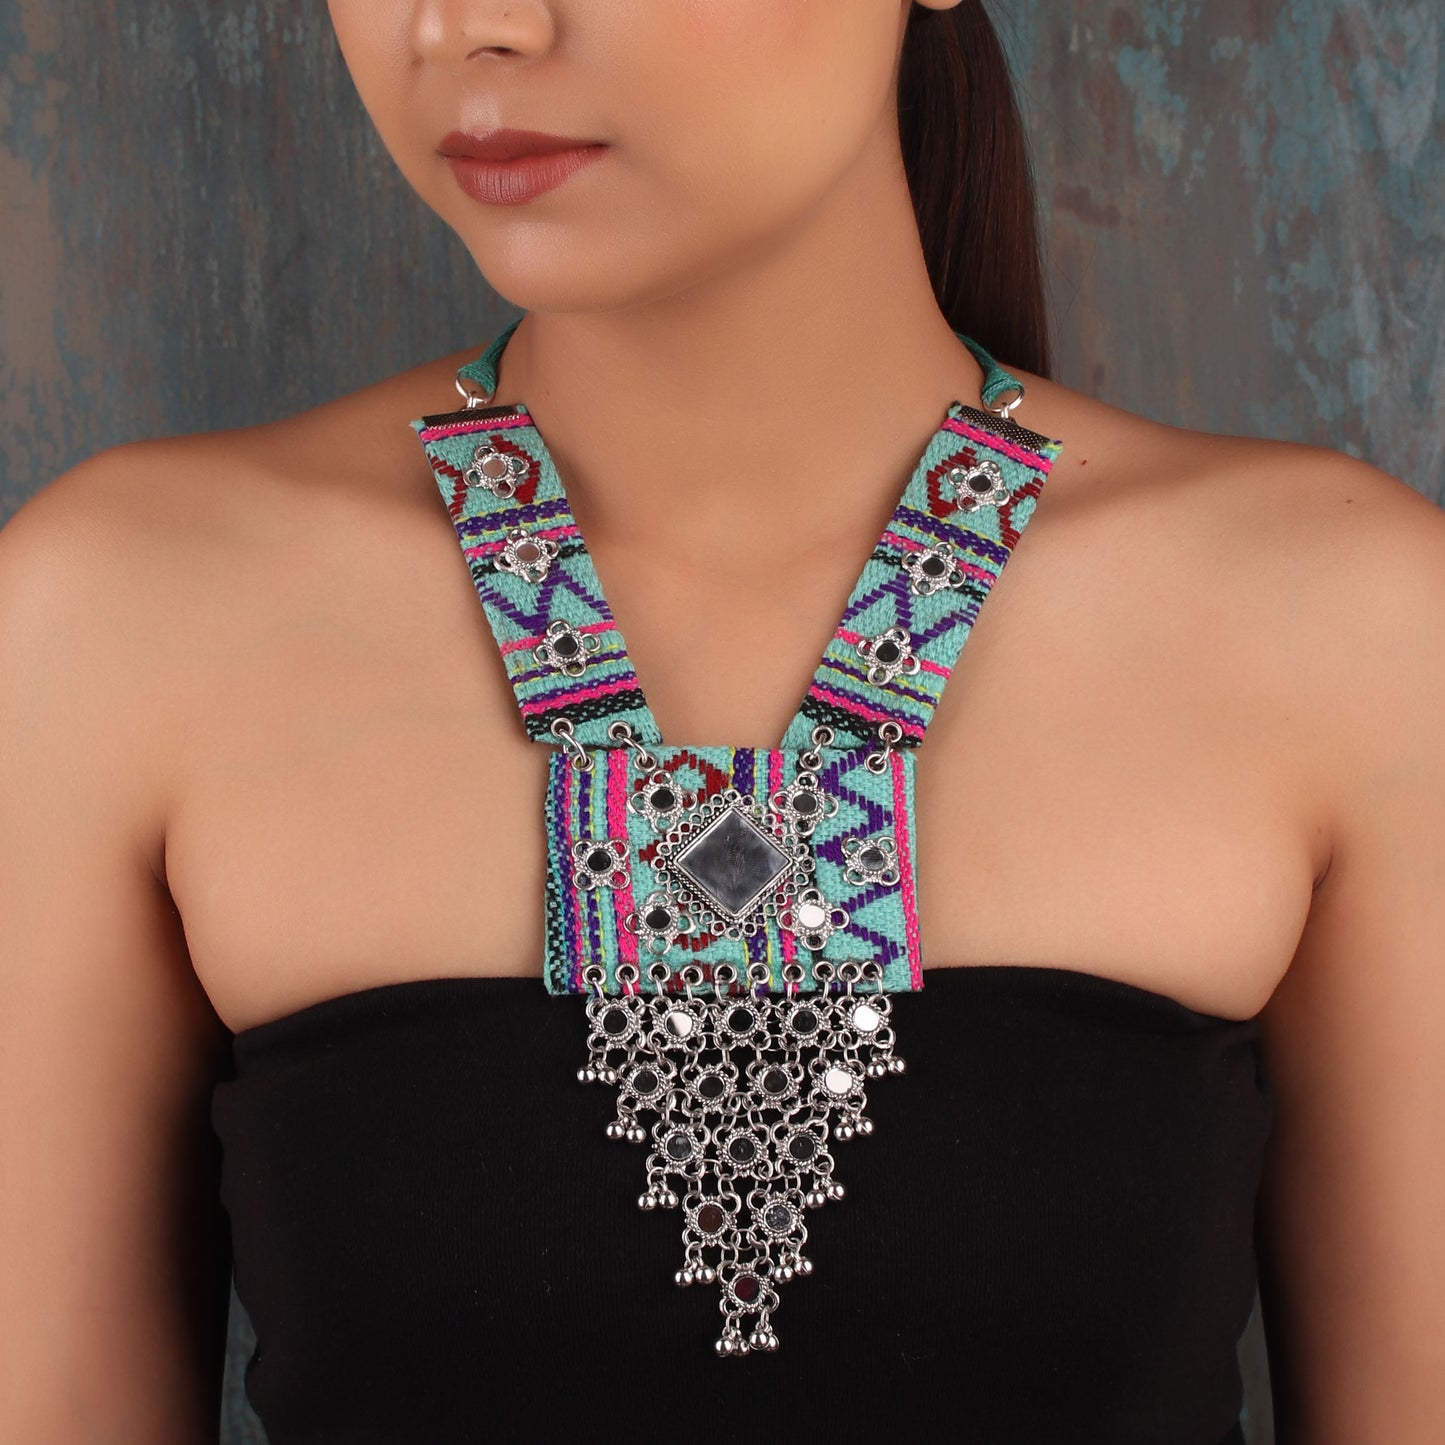 Necklace,The Naayika Necklace in Sea Blue - Cippele Multi Store